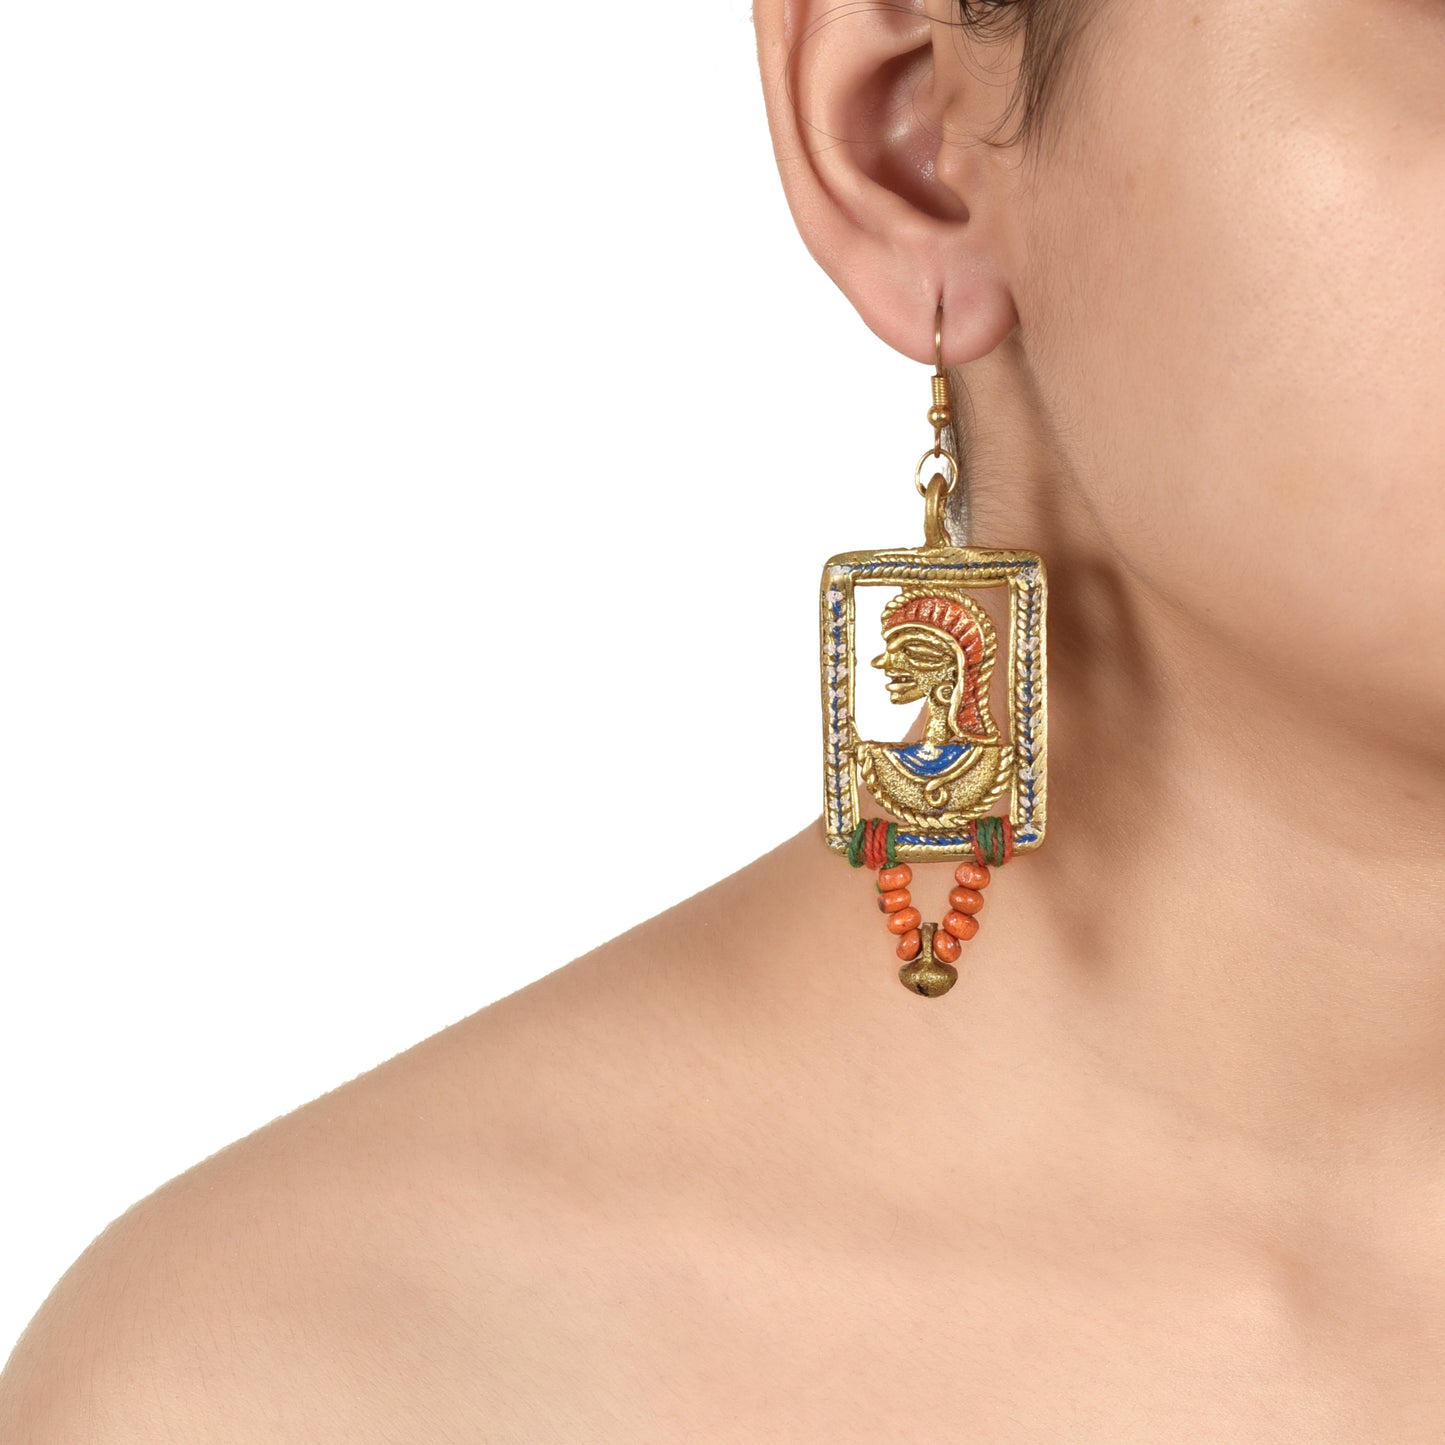 The Empress in Window Handcrafted Tribal Dhokra Earrings